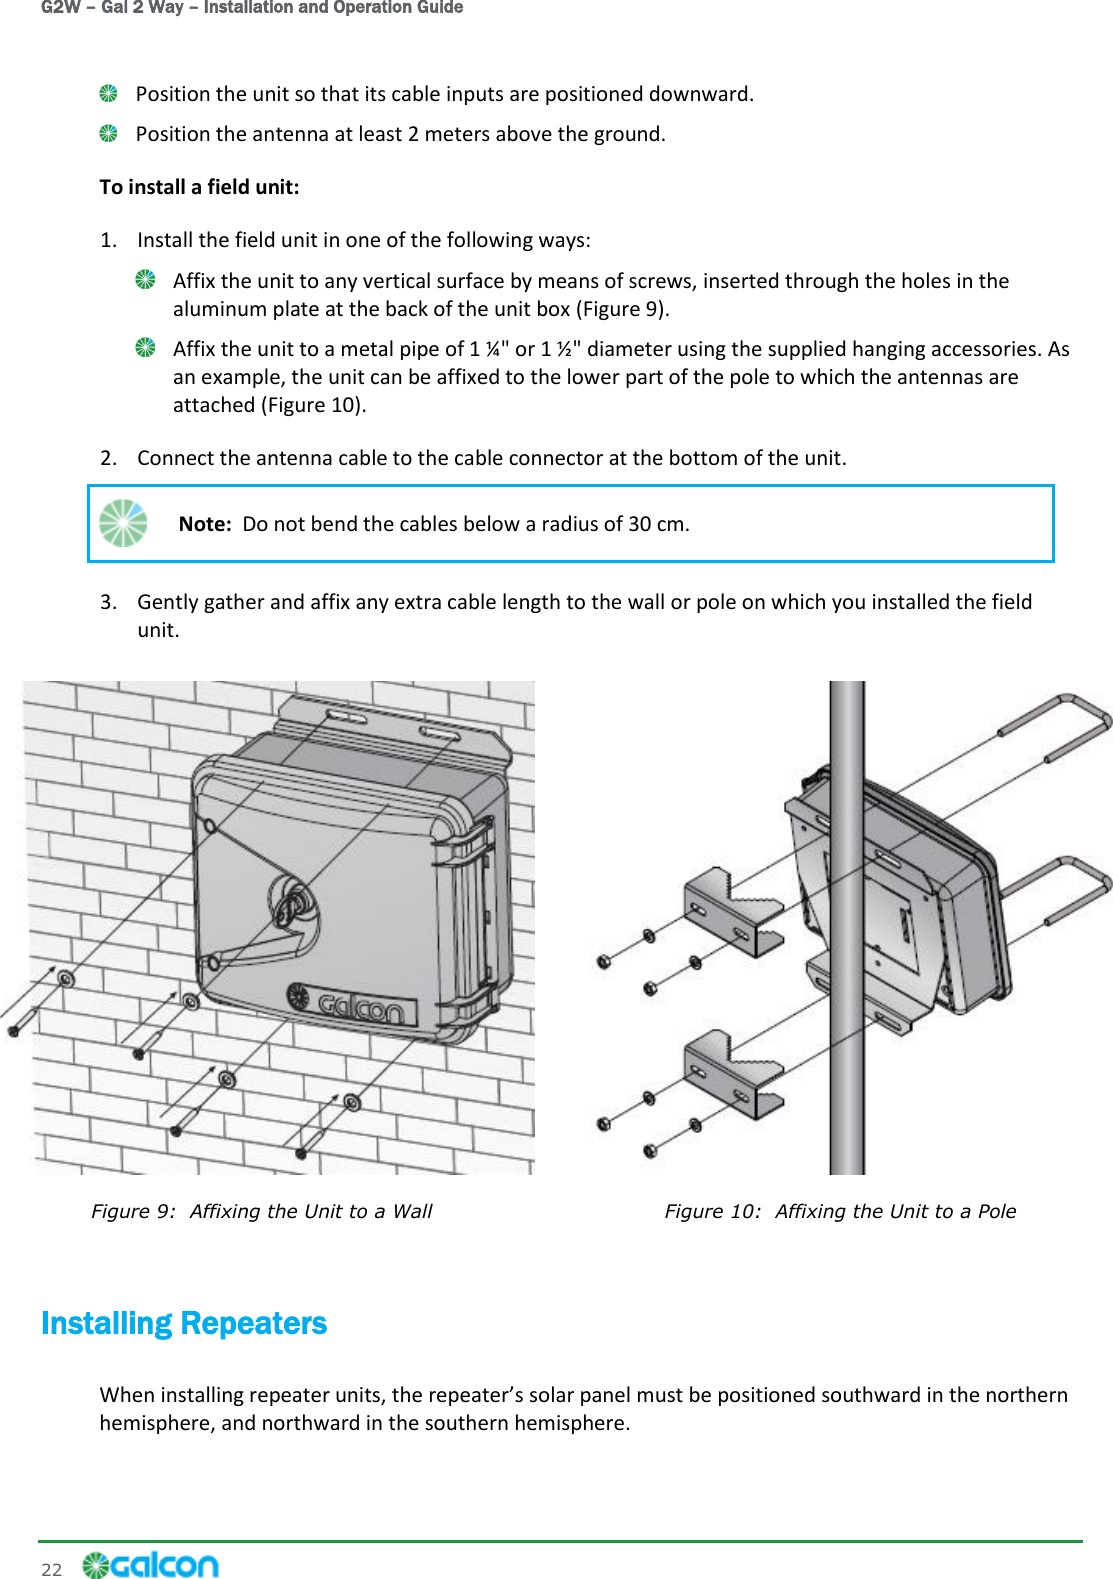 G2W – Gal 2 Way – Installation and Operation Guide 22      Position the unit so that its cable inputs are positioned downward.  Position the antenna at least 2 meters above the ground. To install a field unit: 1. Install the field unit in one of the following ways:  Affix the unit to any vertical surface by means of screws, inserted through the holes in the aluminum plate at the back of the unit box (Figure 9).  Affix the unit to a metal pipe of 1 ¼&quot; or 1 ½&quot; diameter using the supplied hanging accessories. As an example, the unit can be affixed to the lower part of the pole to which the antennas are attached (Figure 10). 2. Connect the antenna cable to the cable connector at the bottom of the unit.  Note:  Do not bend the cables below a radius of 30 cm. 3. Gently gather and affix any extra cable length to the wall or pole on which you installed the field unit.  Figure 9:  Affixing the Unit to a Wall  Figure 10:  Affixing the Unit to a Pole Installing Repeaters solar panel must be positioned southward in the northern hemisphere, and northward in the southern hemisphere. 